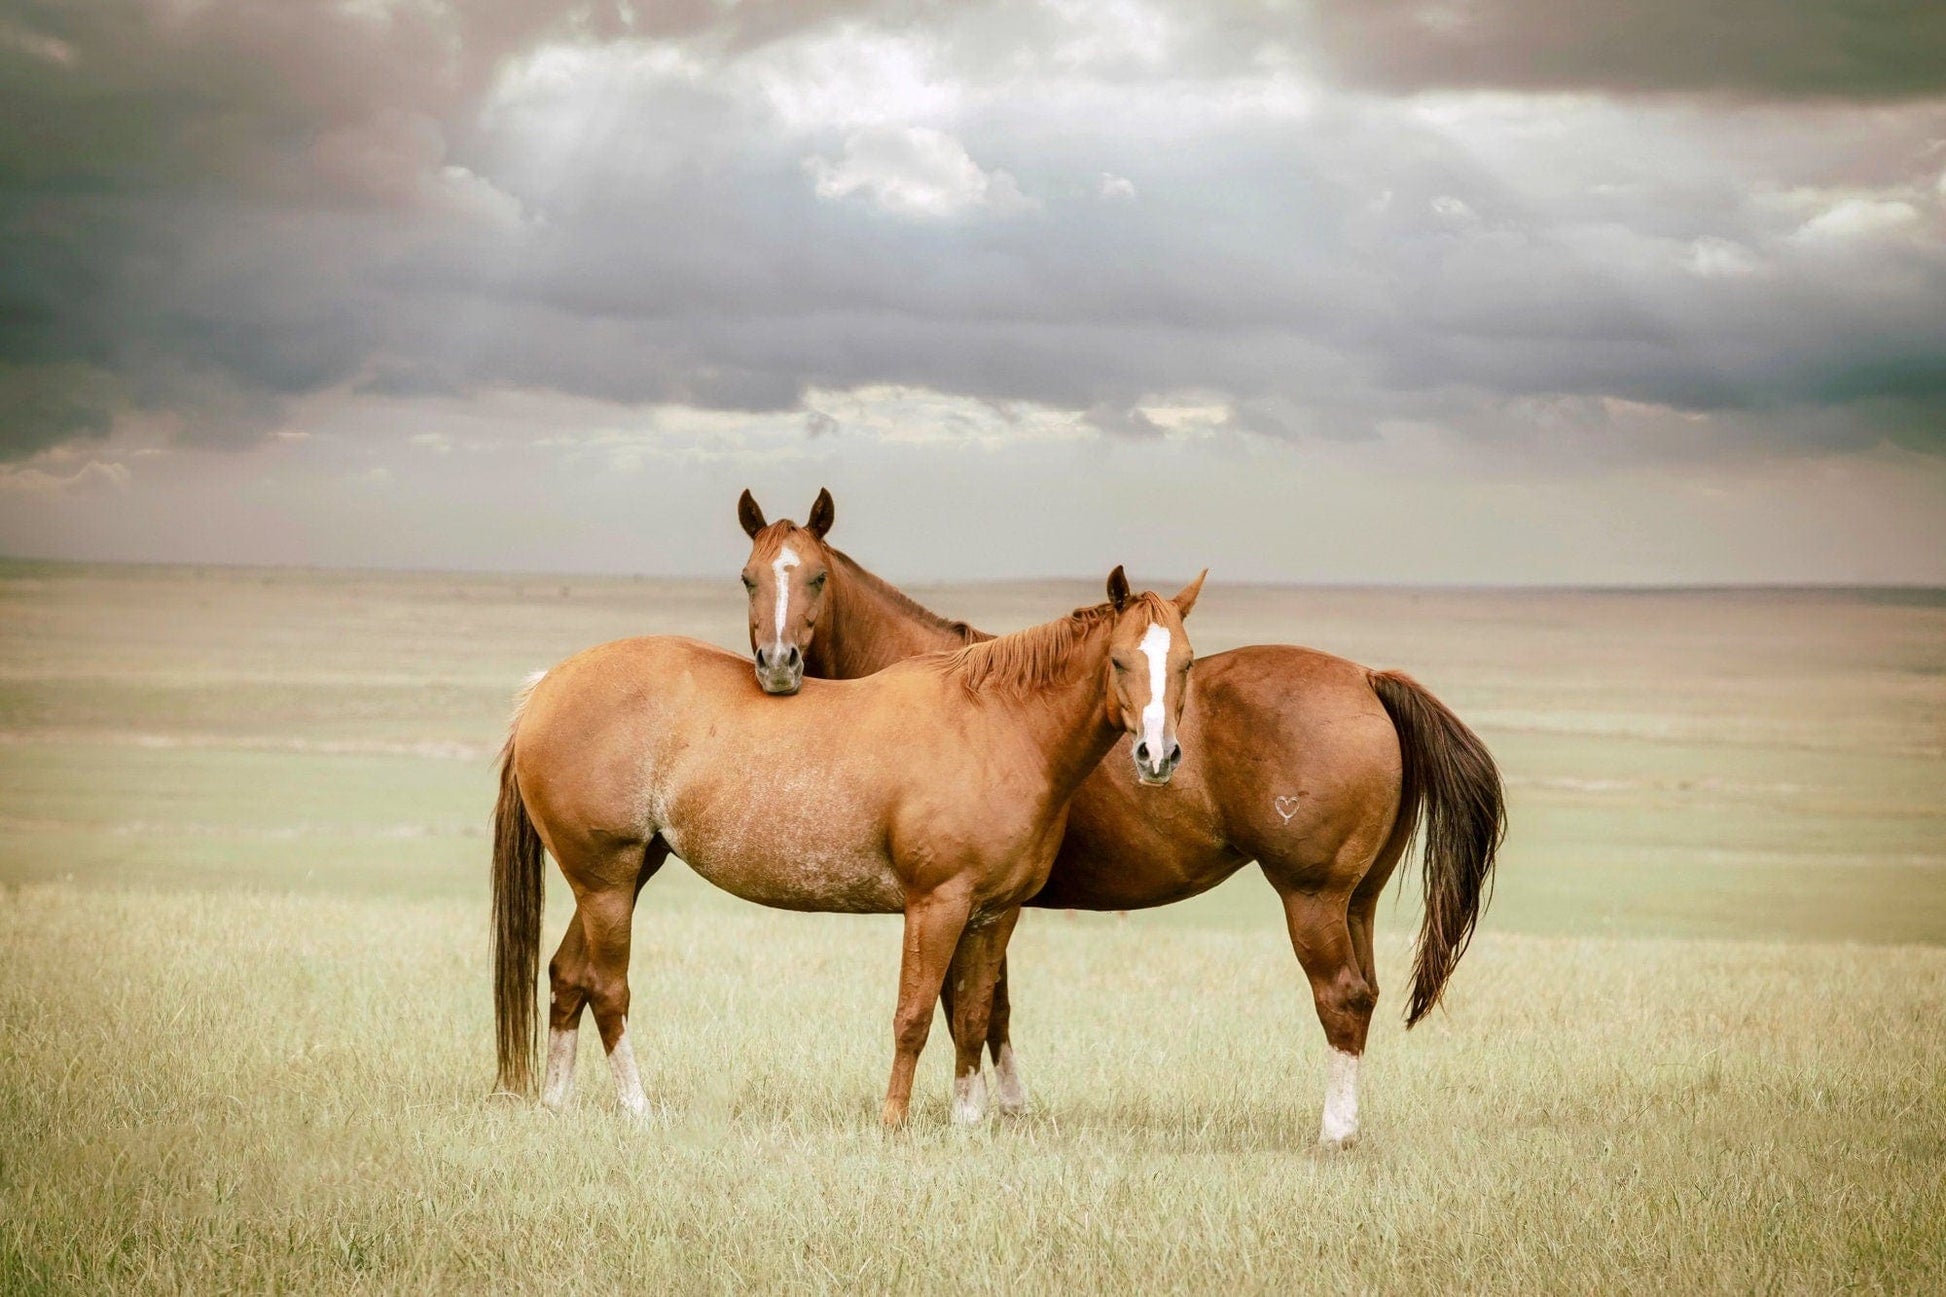 Cowboy Art - Quarter Horses and Stormy Sky Paper Photo Print / 12 x 18 Inches Wall Art Teri James Photography